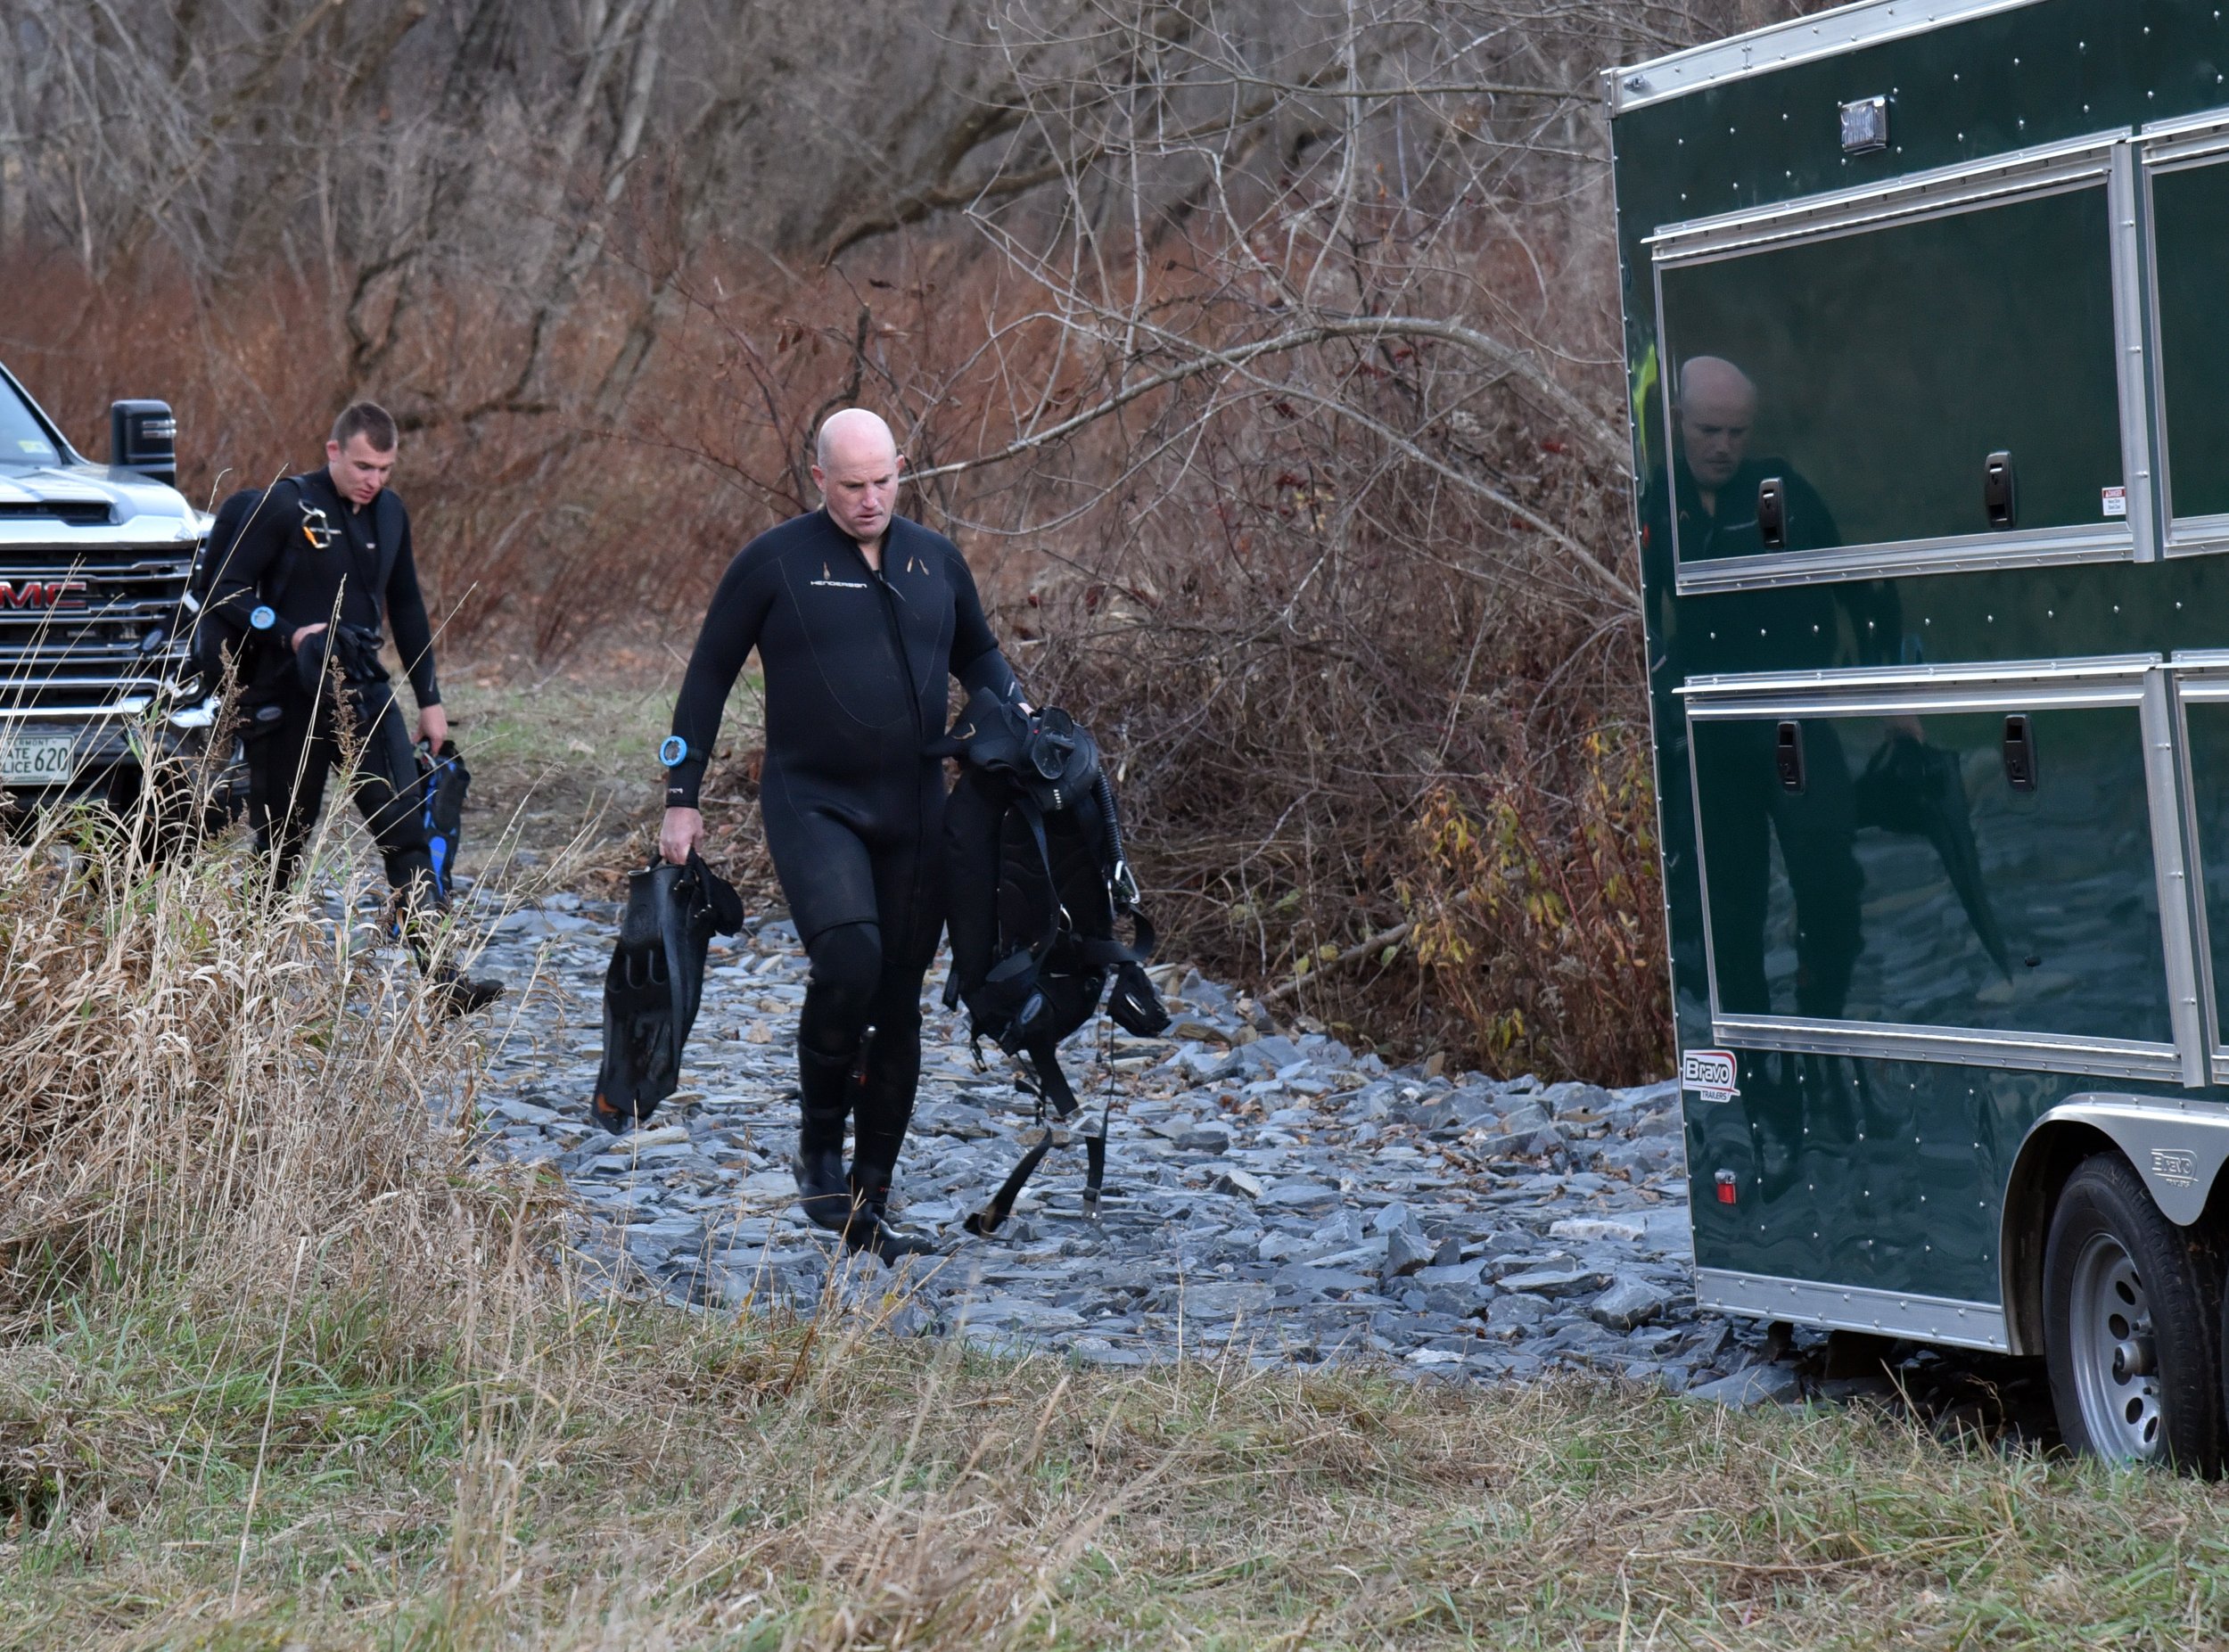  By late afternoon, dive team members are packing up for the day. Photo by Gordon Miller   